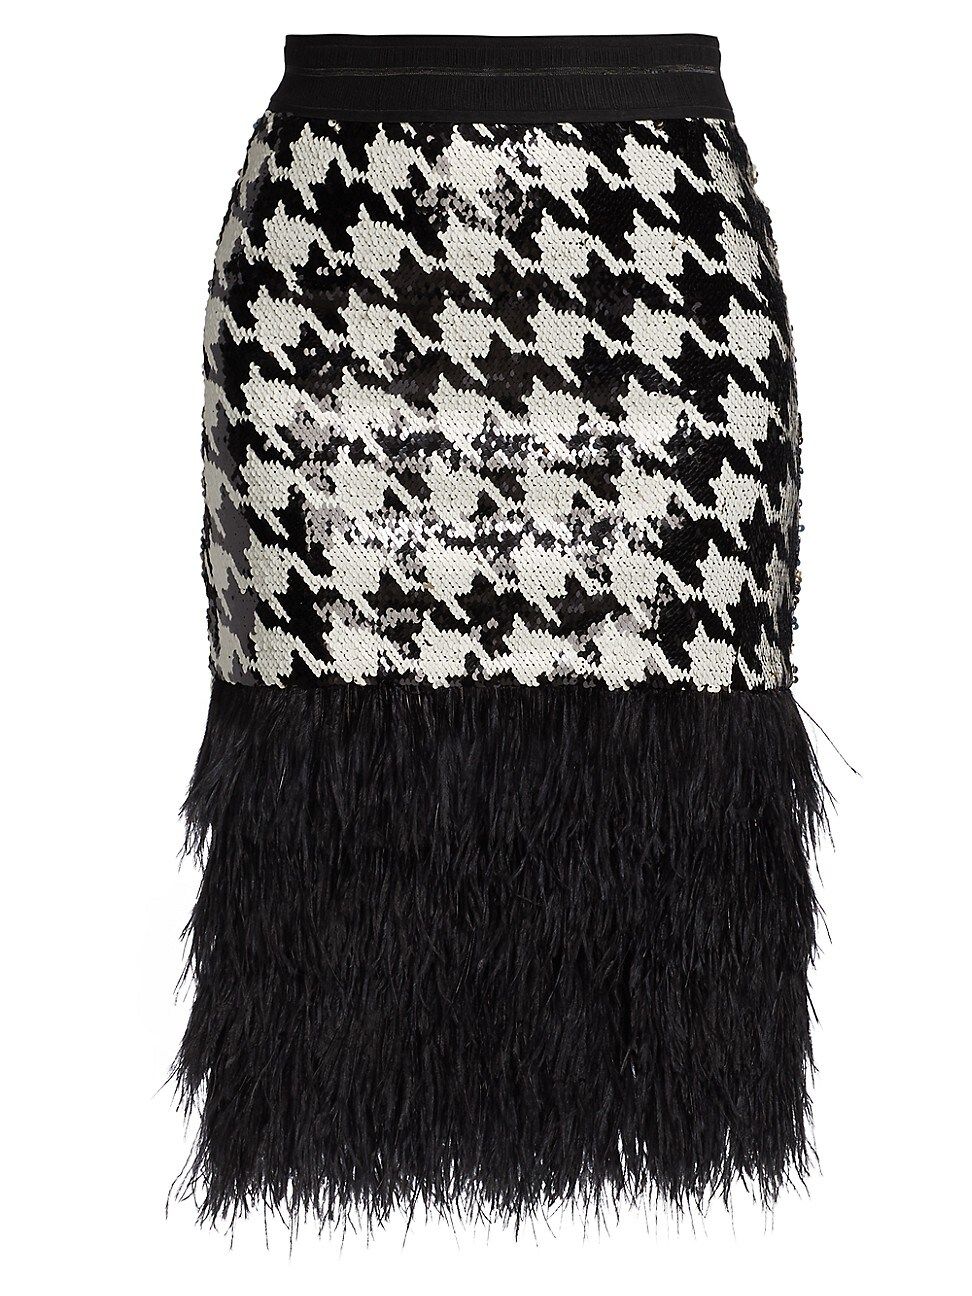 Women's Downtown Girl Sequin & Feather Skirt - Black White Houndstooth - Size XS | Saks Fifth Avenue